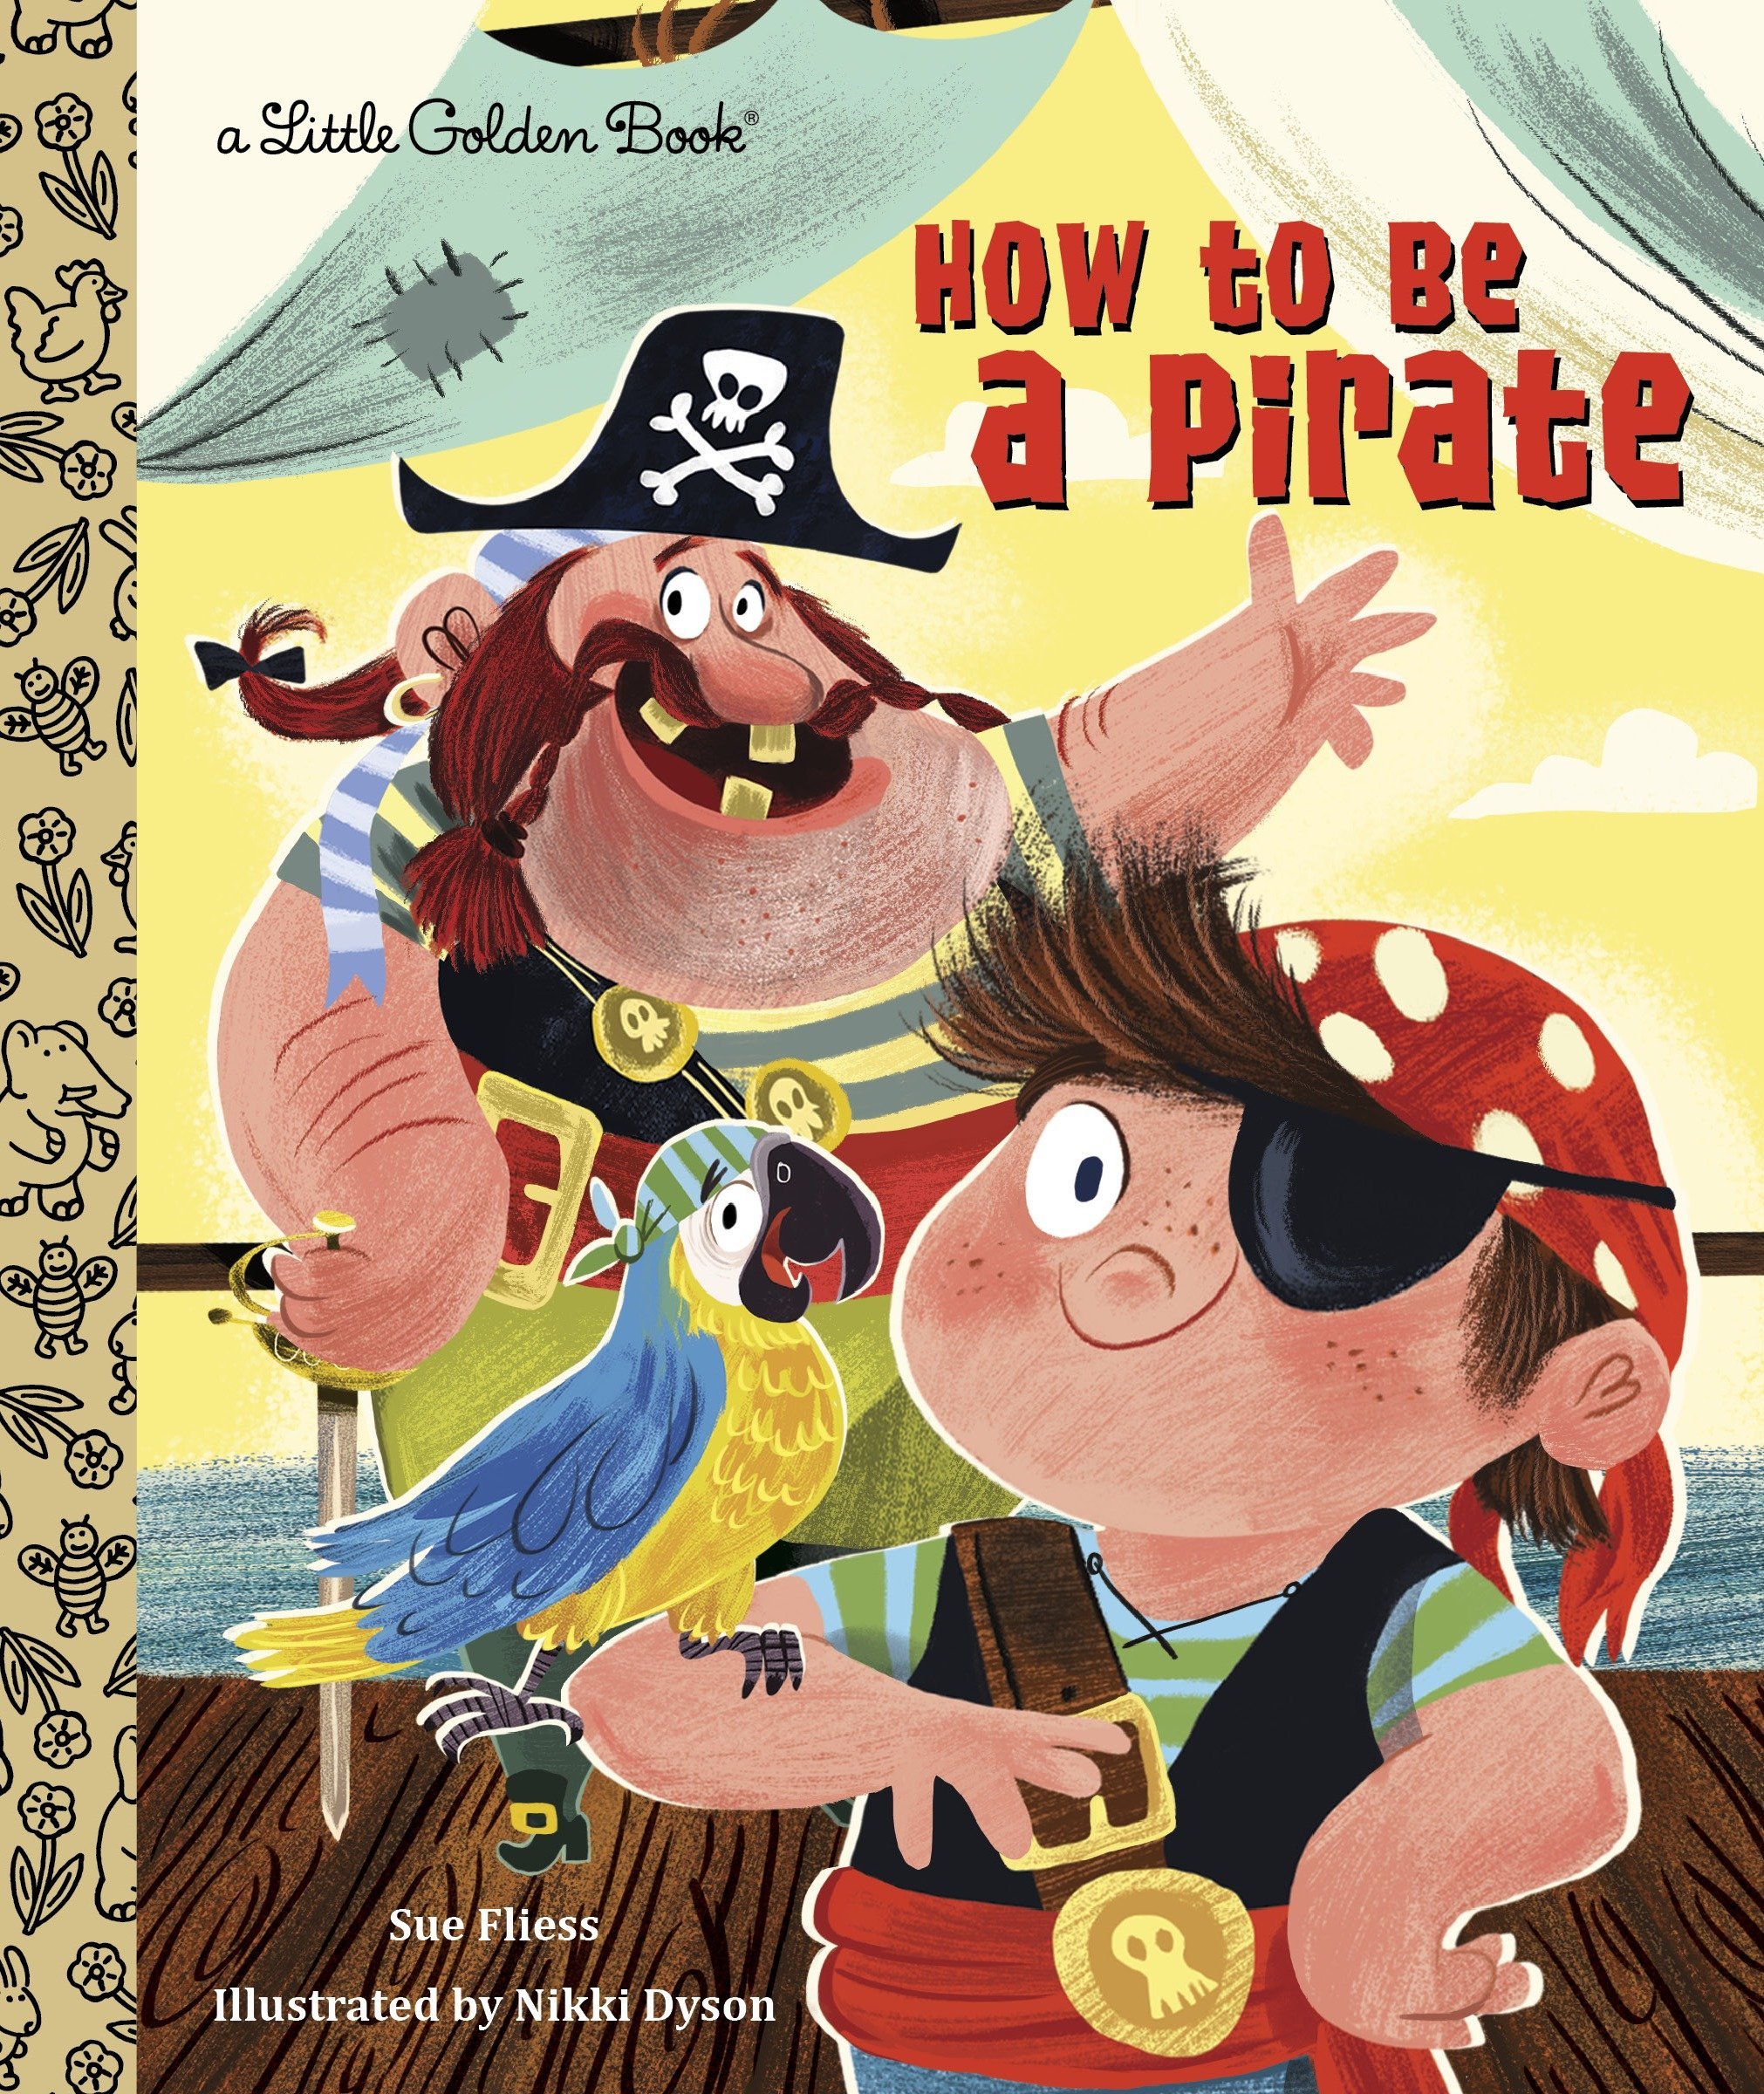 speech and language teaching concepts for how to be a pirate in speech therapy